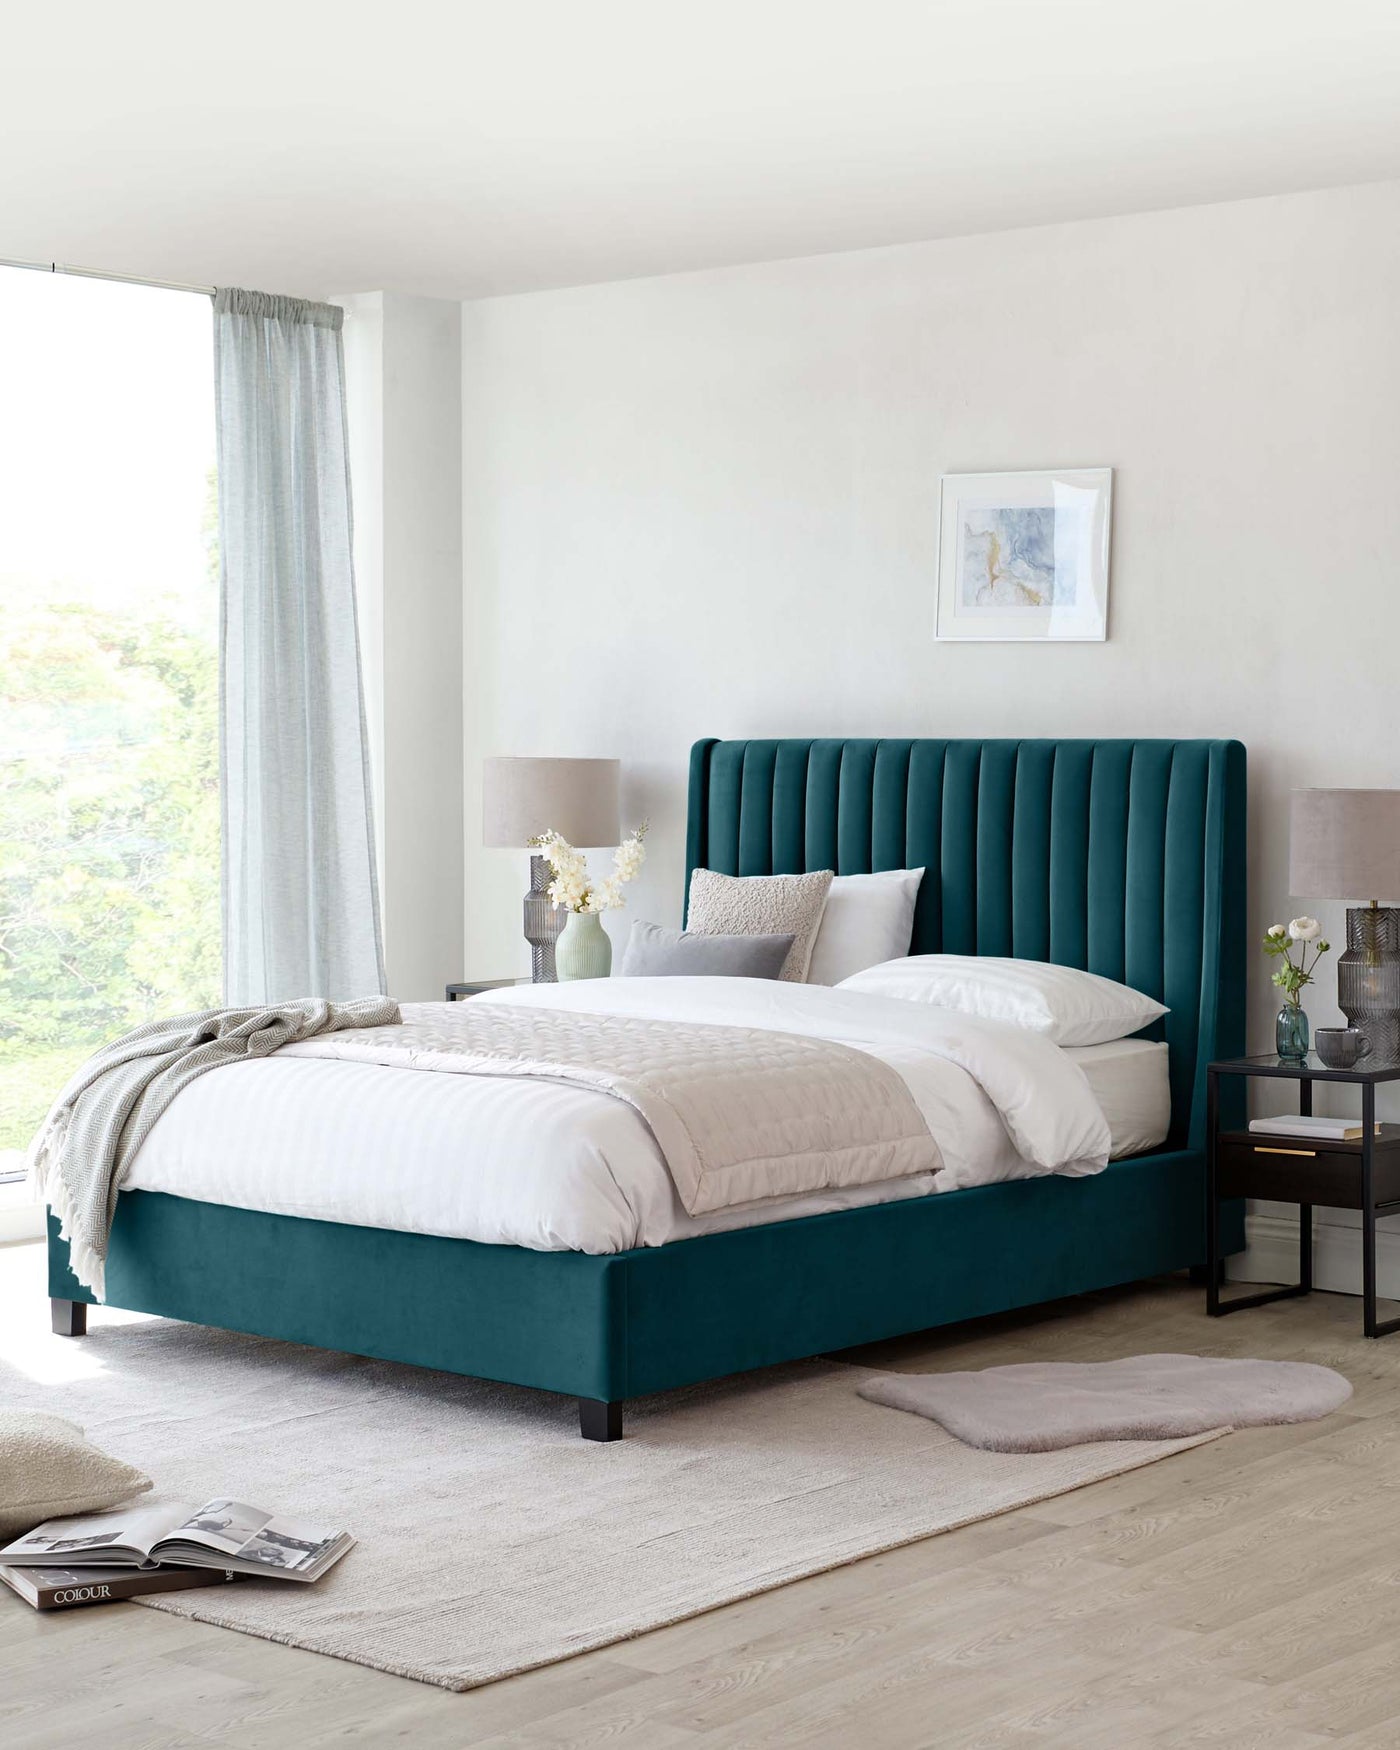 Elegant bedroom setup featuring a teal upholstered bed with a vertically channelled headboard and a matching bed frame. The bed is dressed with crisp white linens and assorted neutral pillows. Beside the bed is a sleek, black nightstand with an open shelf and a drawer, topped with a modern silver lamp and decorative vases. The room is anchored by a soft beige area rug, and a grey throw is casually draped over the foot of the bed.